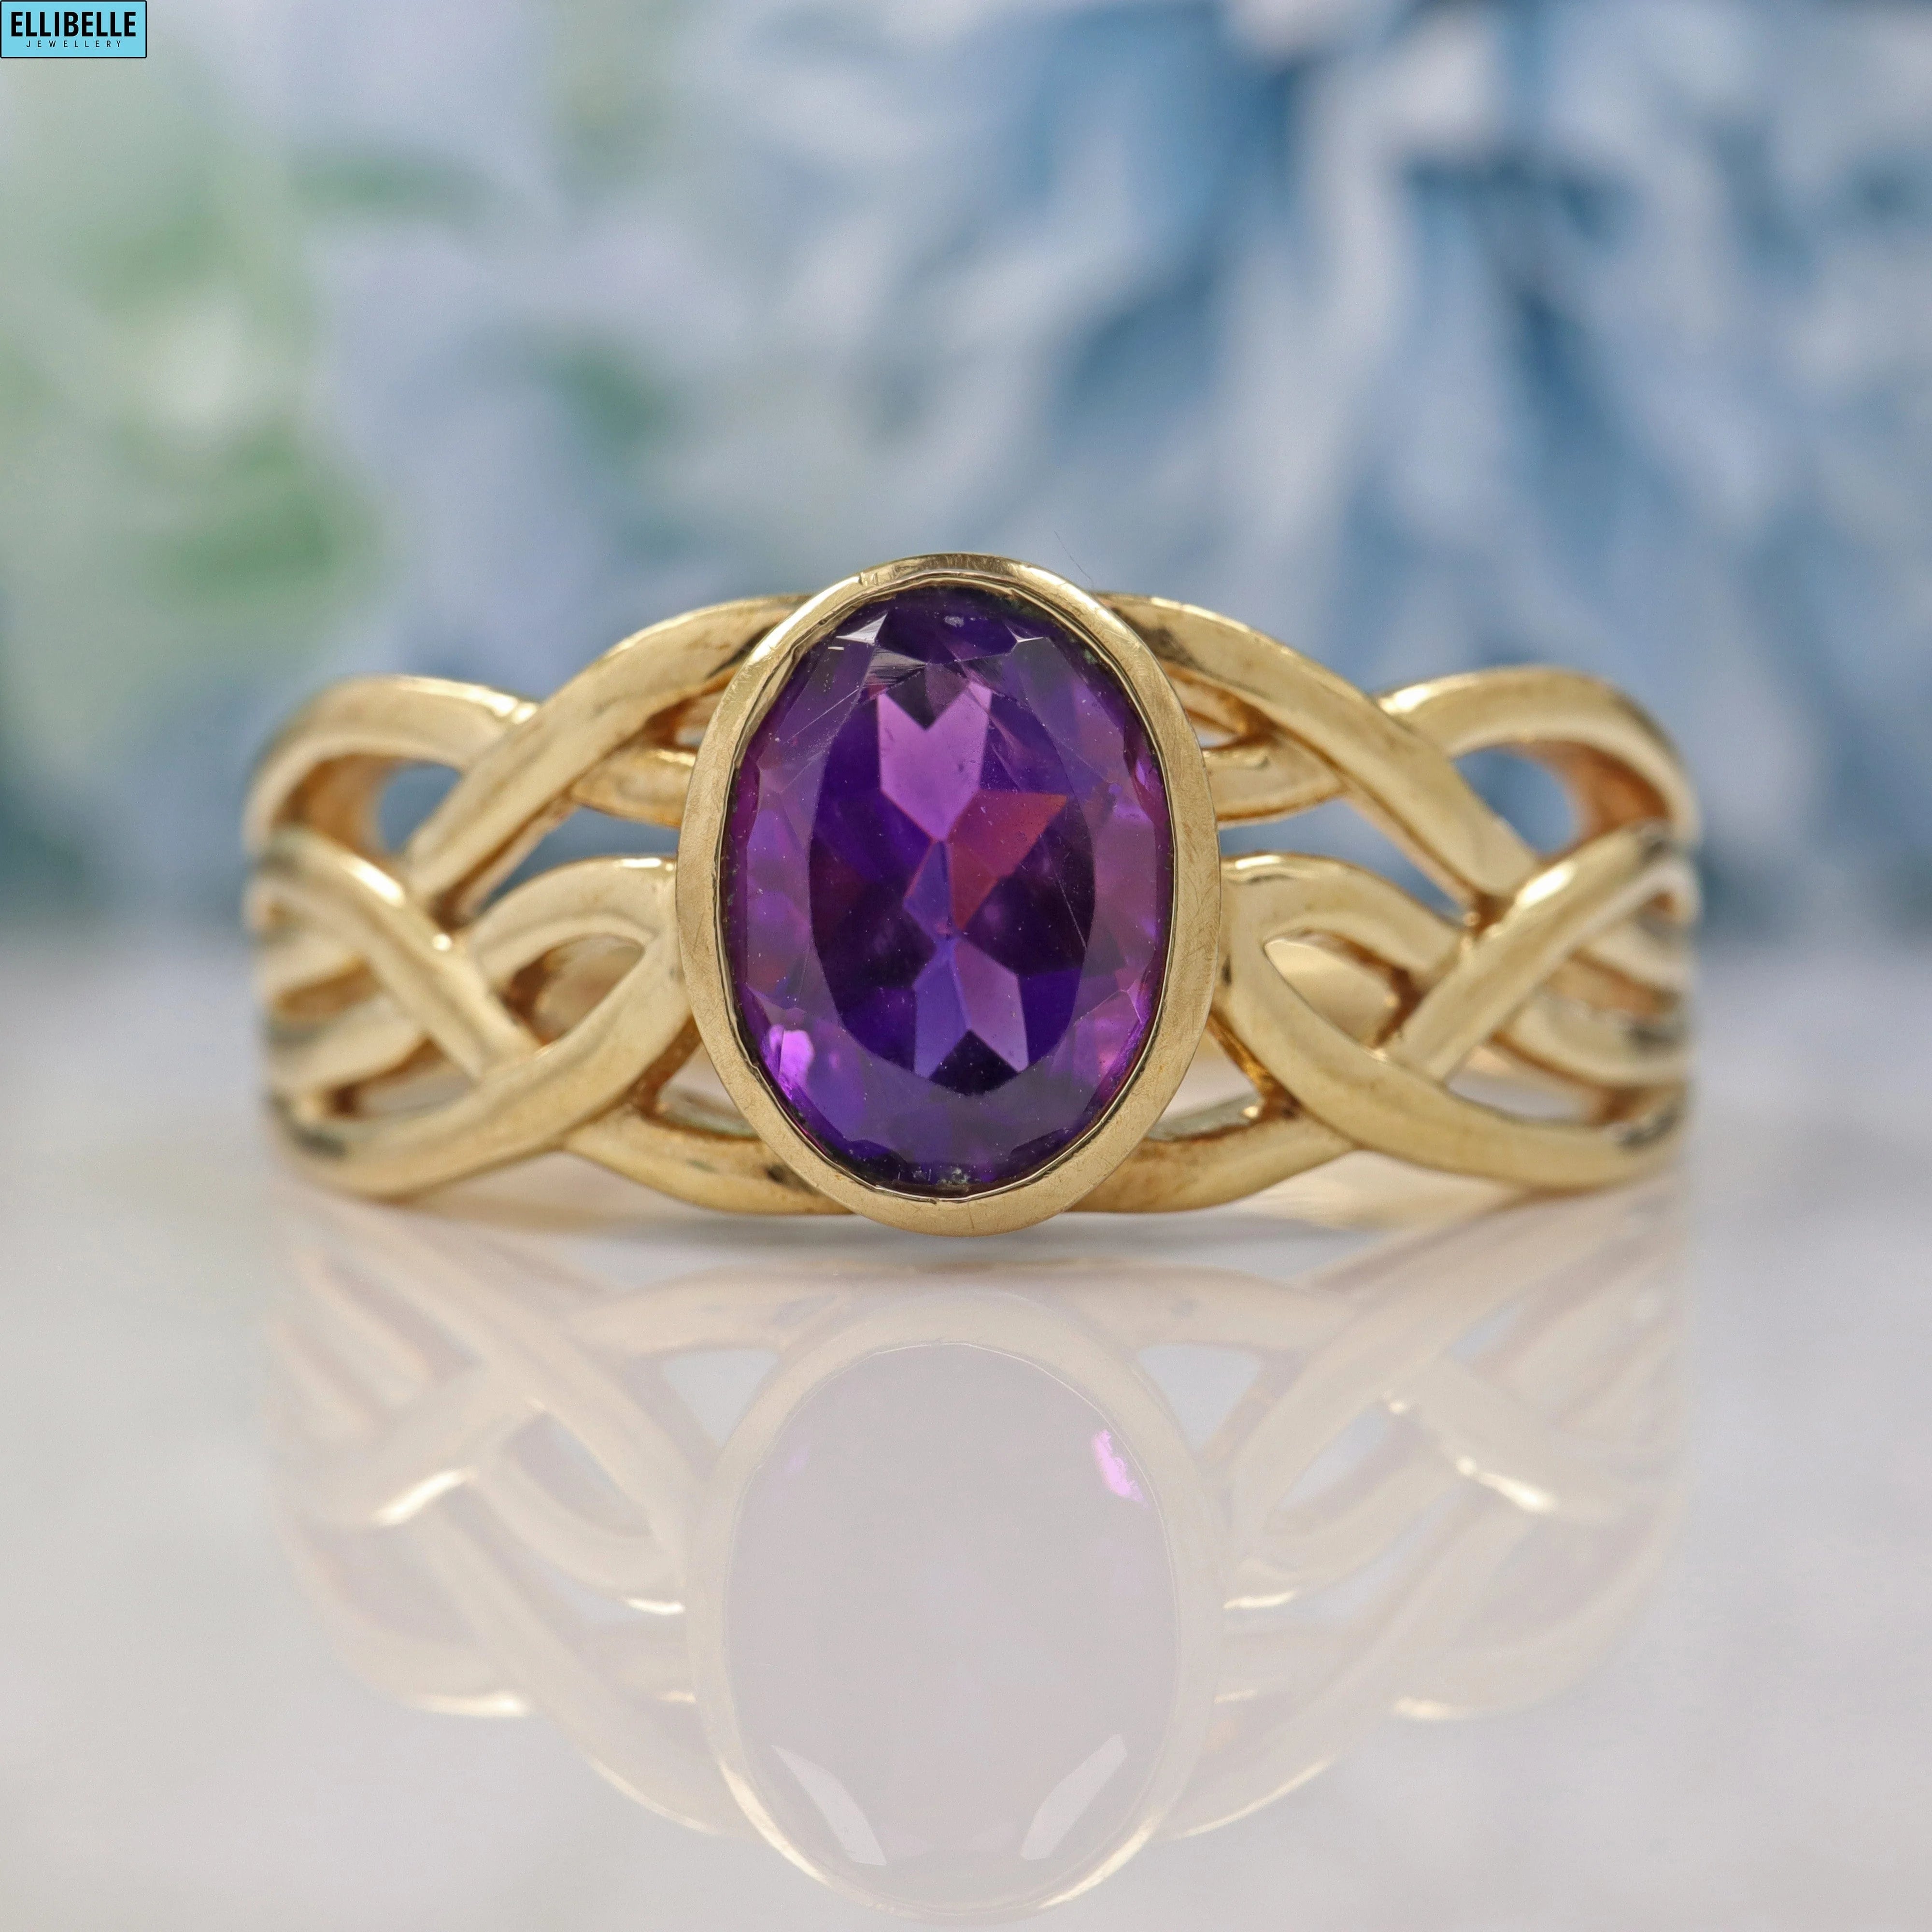 Ellibelle Jewellery VINTAGE 9CT GOLD AMETHYST SOLITAIRE KNOT RING